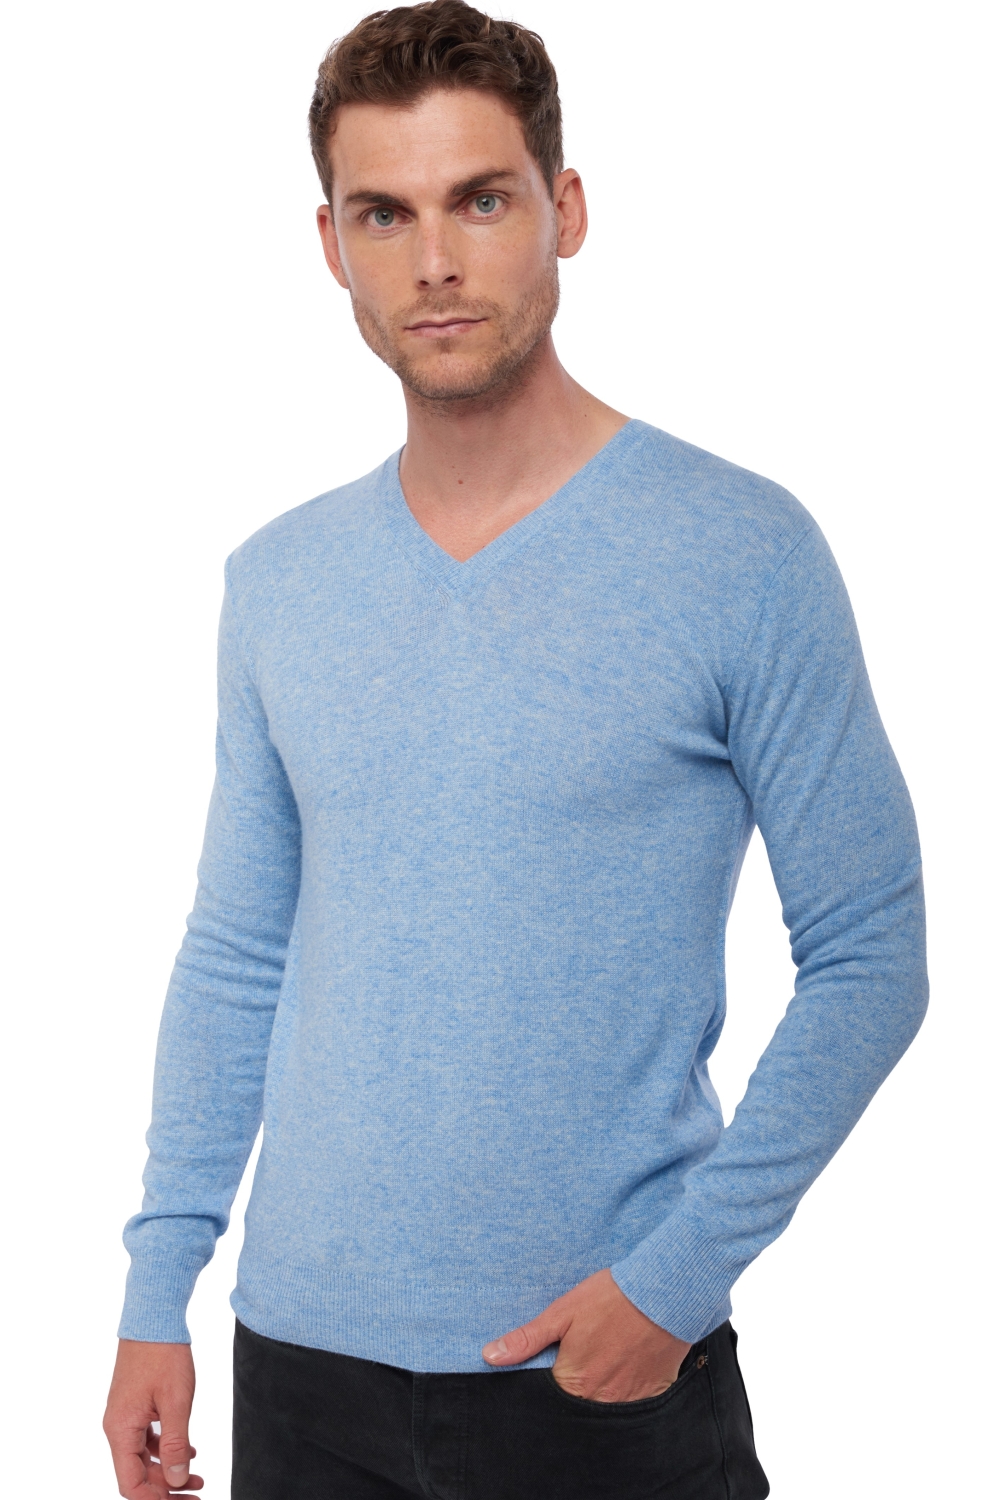 Cashmere men basic sweaters at low prices tor first powder blue l